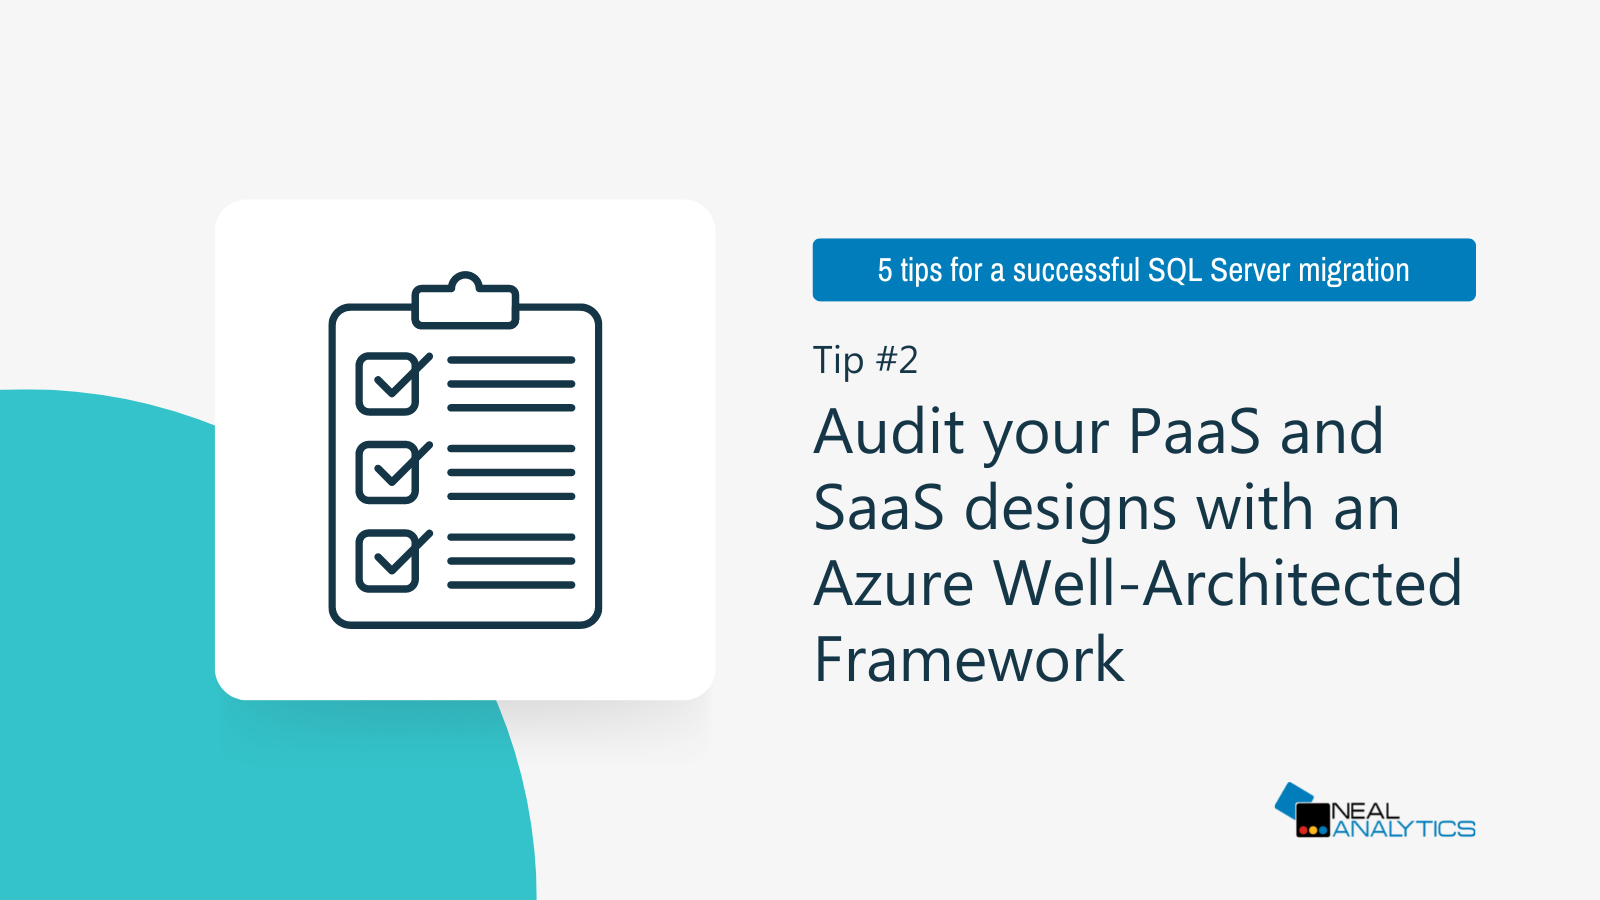 SQL Server migration tip 2: Audit your PaaS and SaaS designations with an Azure Well-Architected Framework